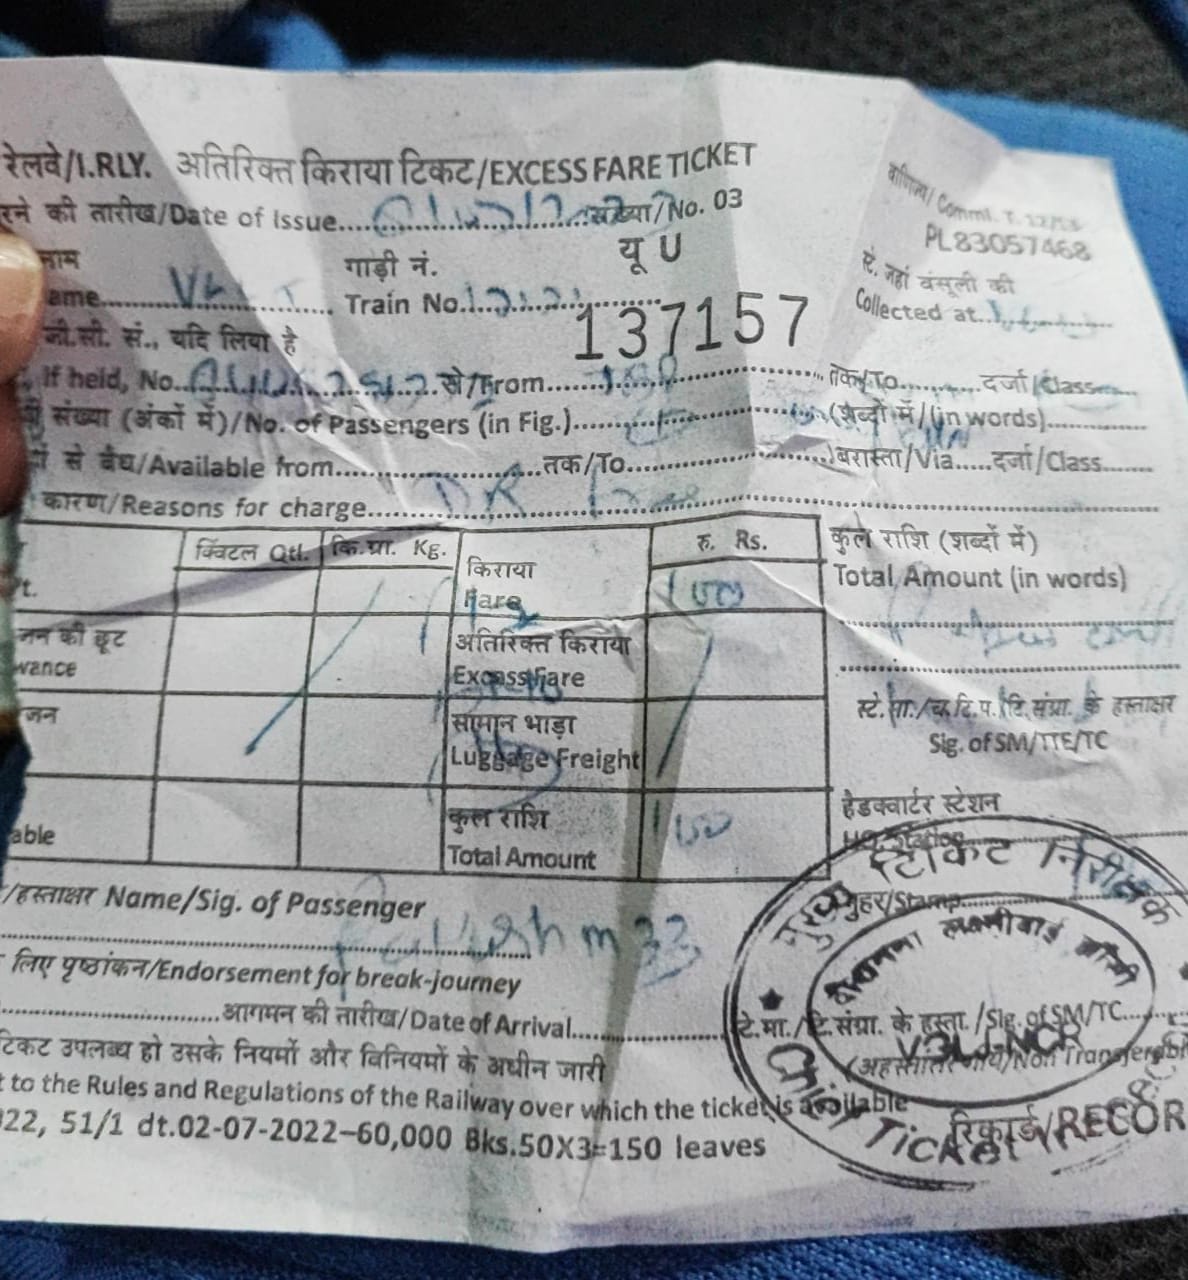 Colonel Rohit Dev (RDX) 🇮🇳 on X: Story of a Solldier commuting by  @RailMinIndia received on WhatsApp I am Subedar XXXXXXXYYYY. Yesterday I  had to go to Delhi from Jabalpur for an